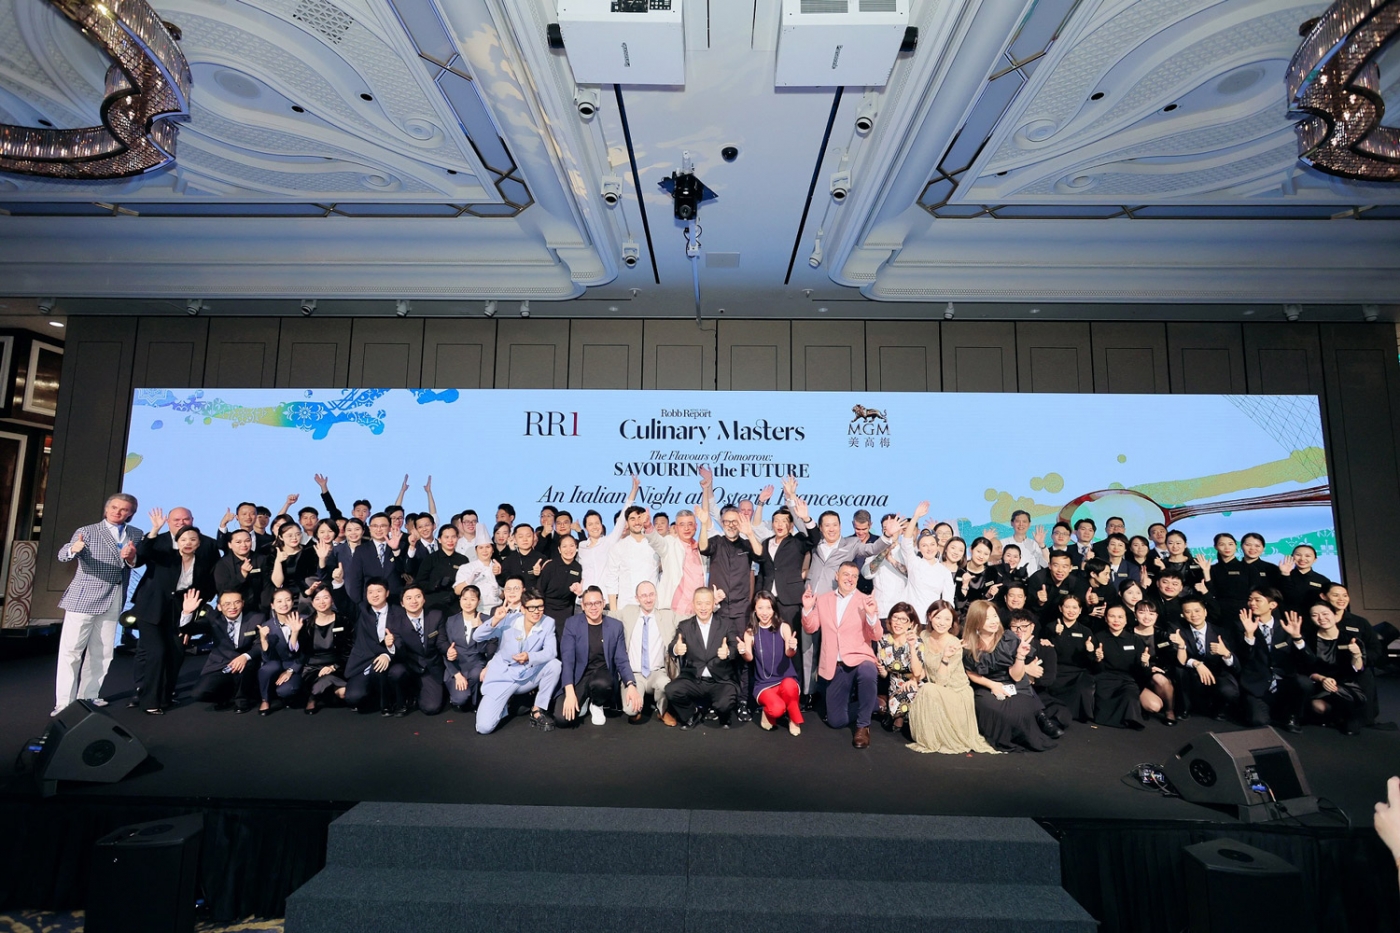 MGM presented the MGM x RR1 Culinary Masters Macau, Asia’s first exclusive RR1 Signature Event in Macau.